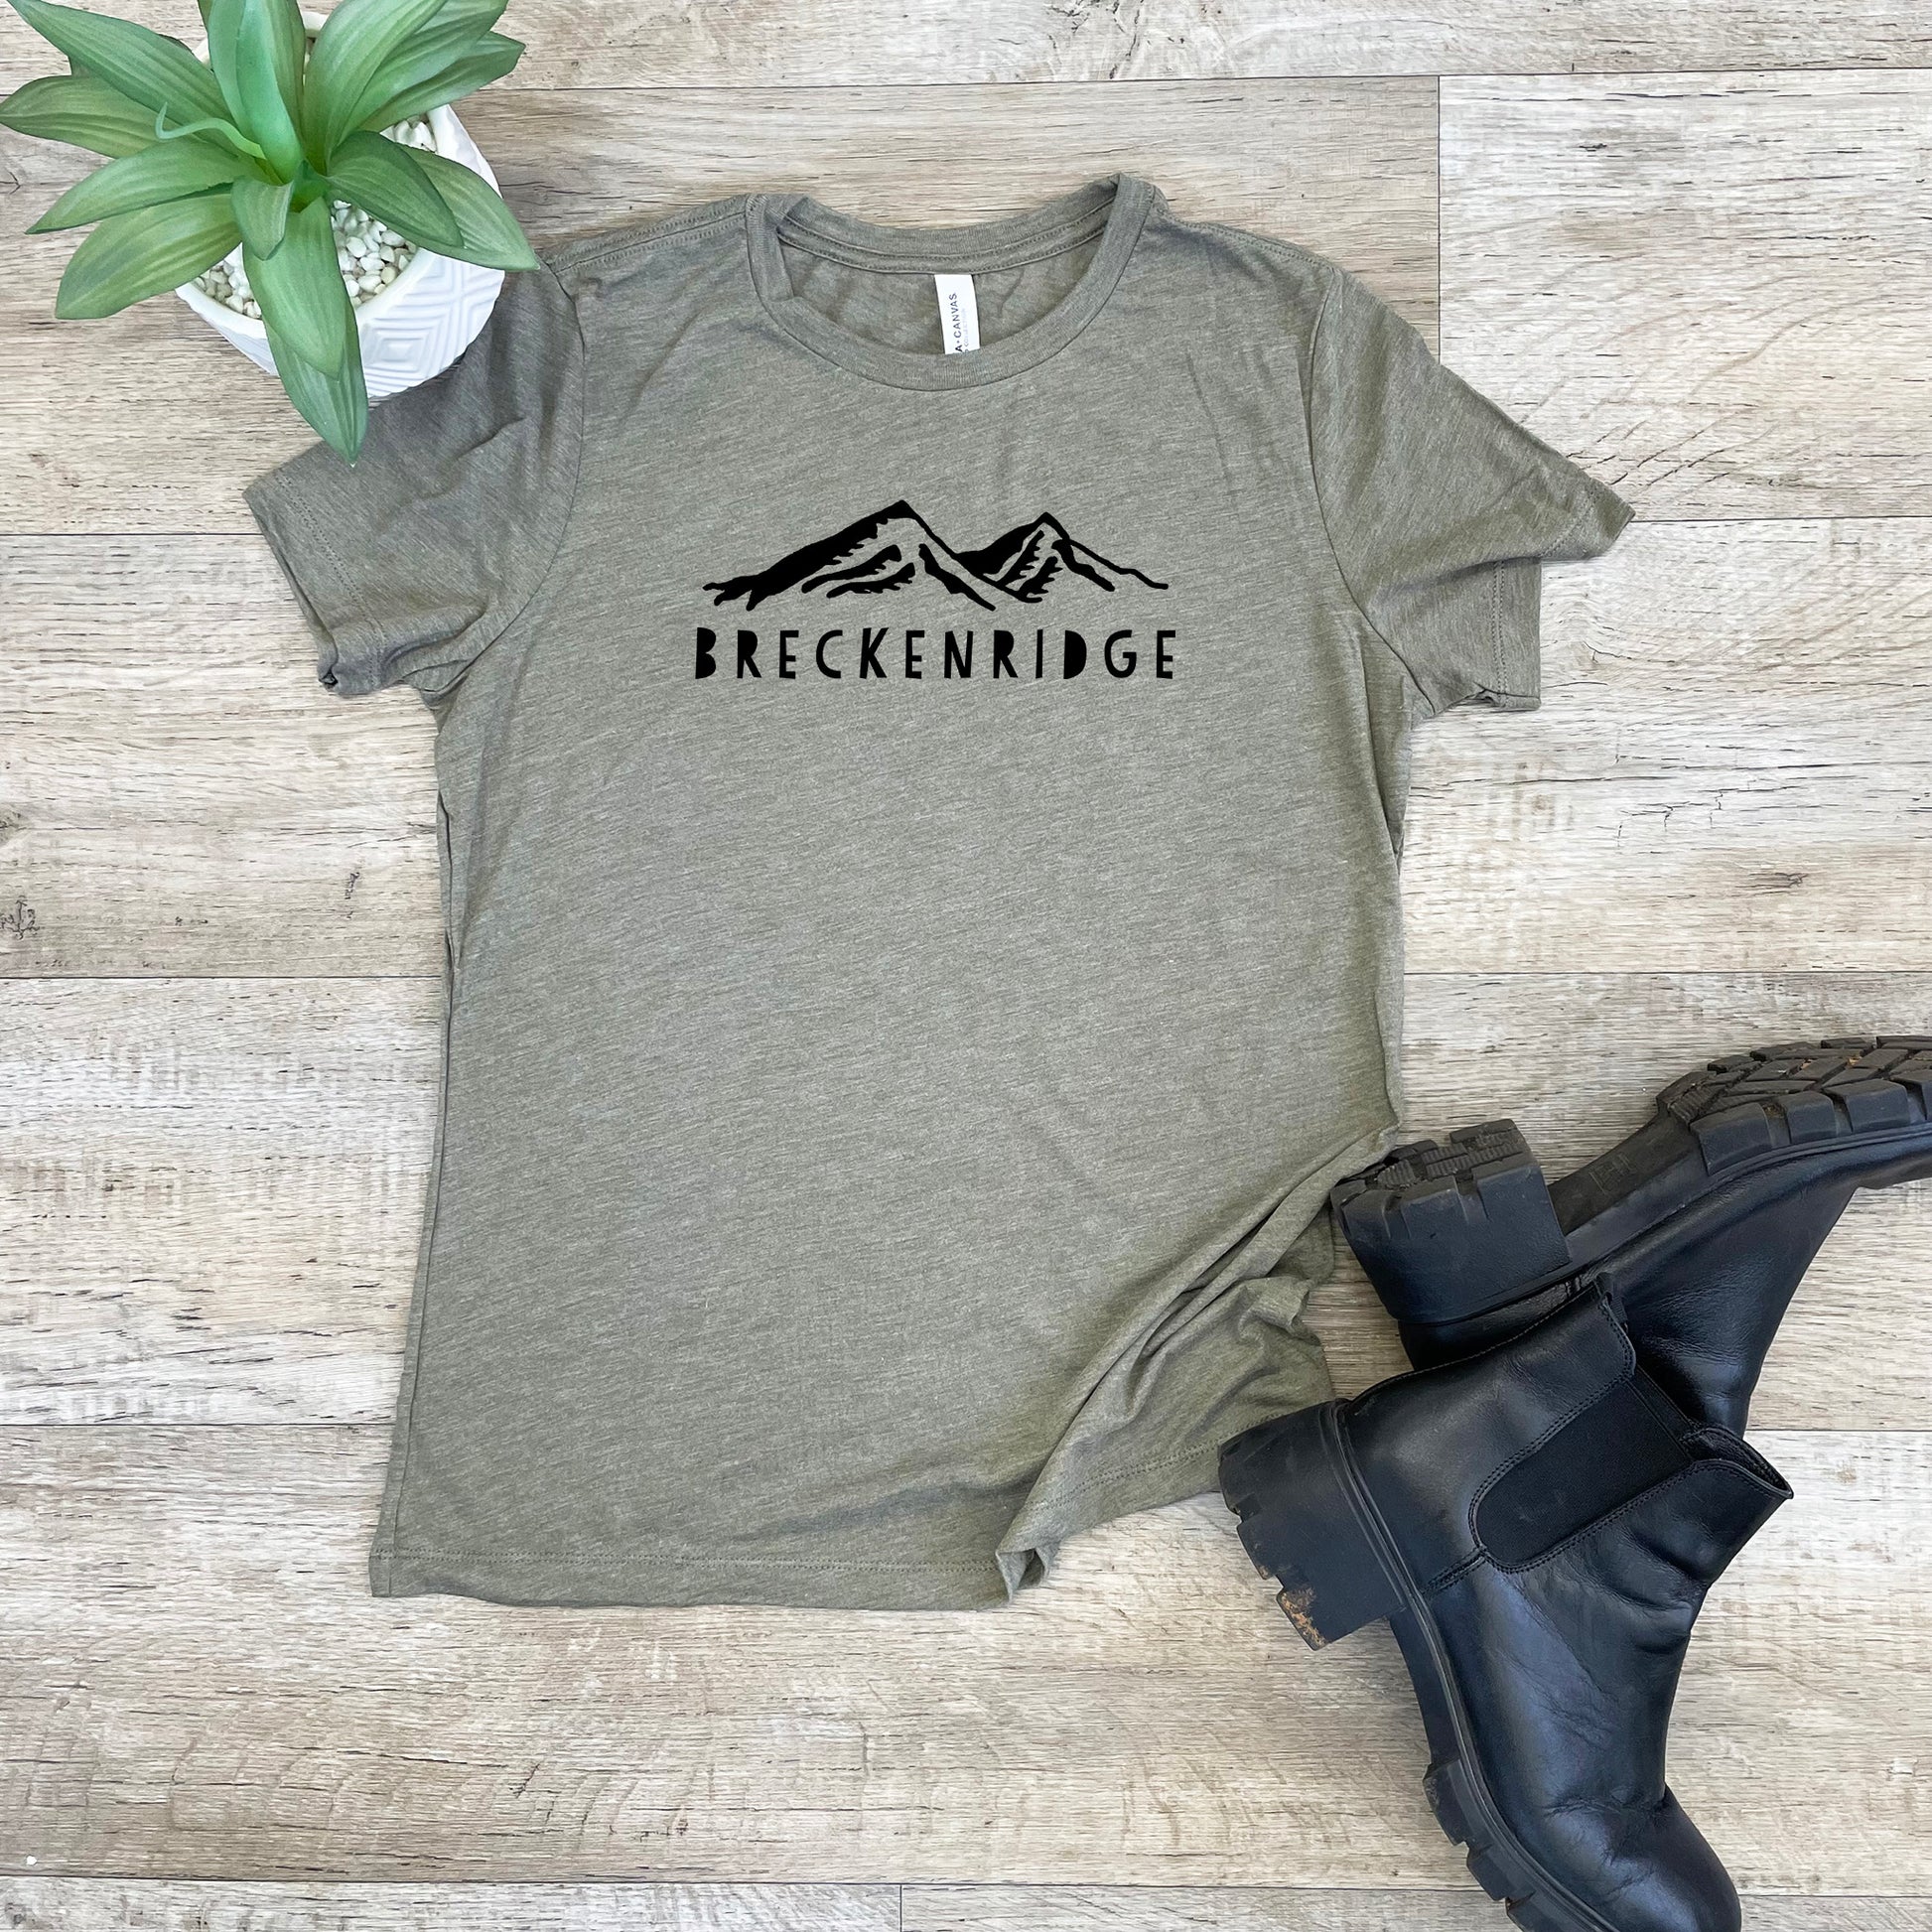 a t - shirt that says trekenridge on it next to a pair of